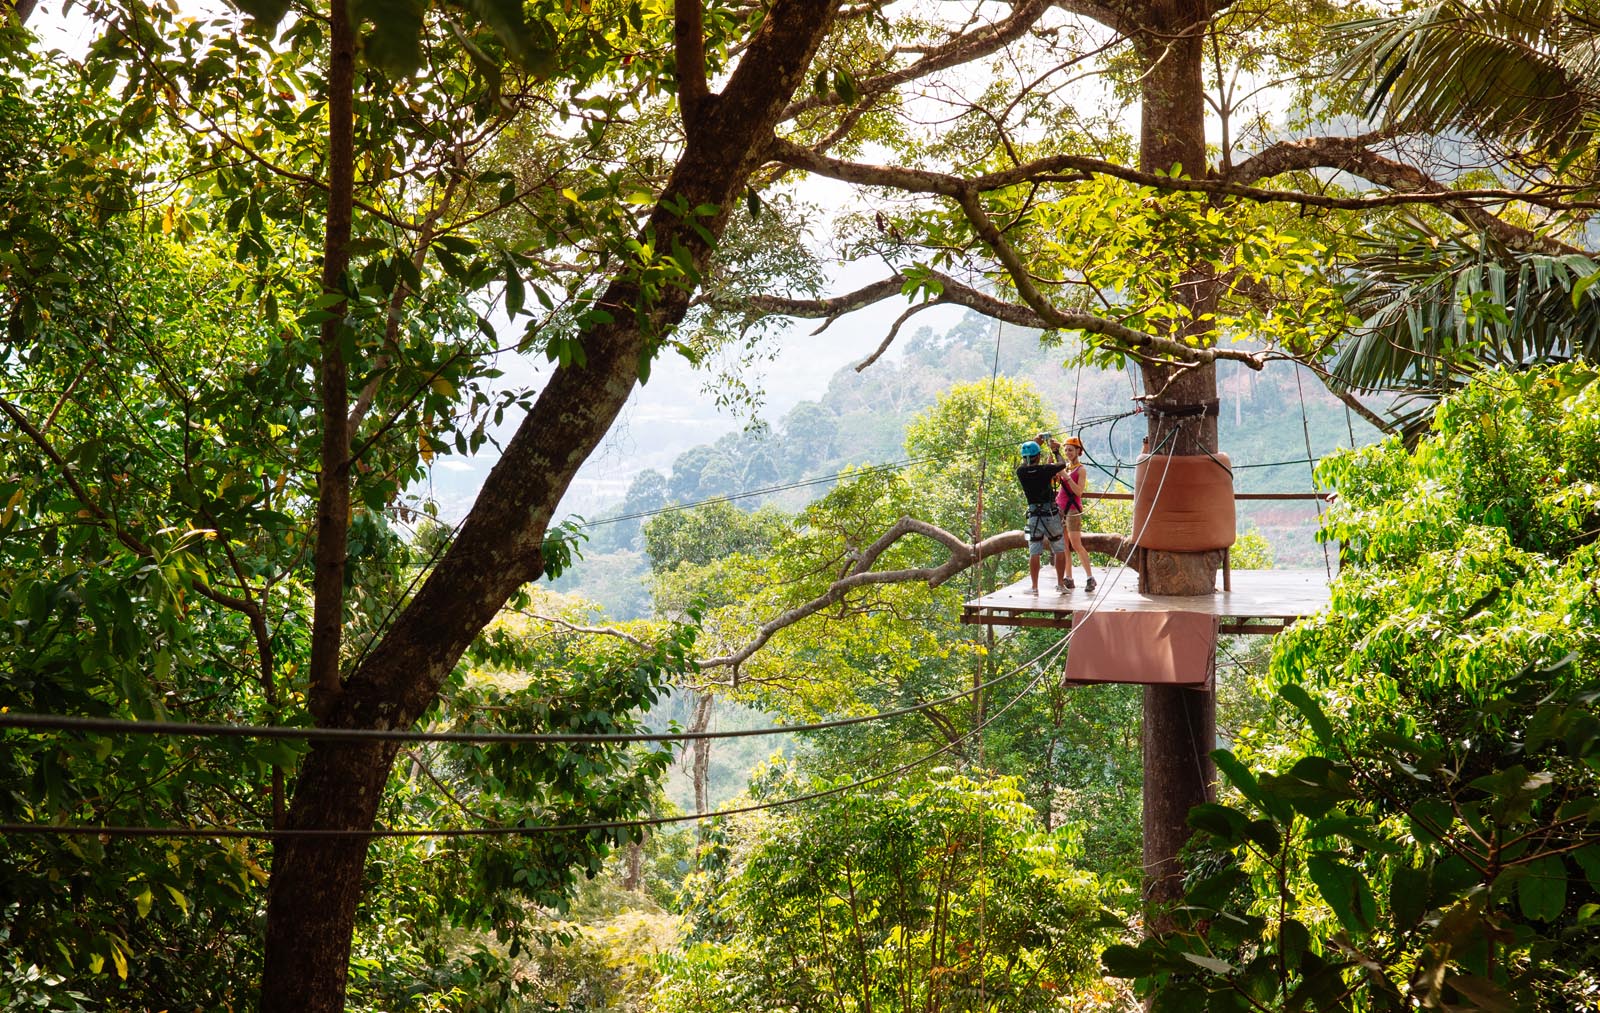 Tourists on a zip line in the tropical forest canopy try one of most popular outdoor activities in Phuket